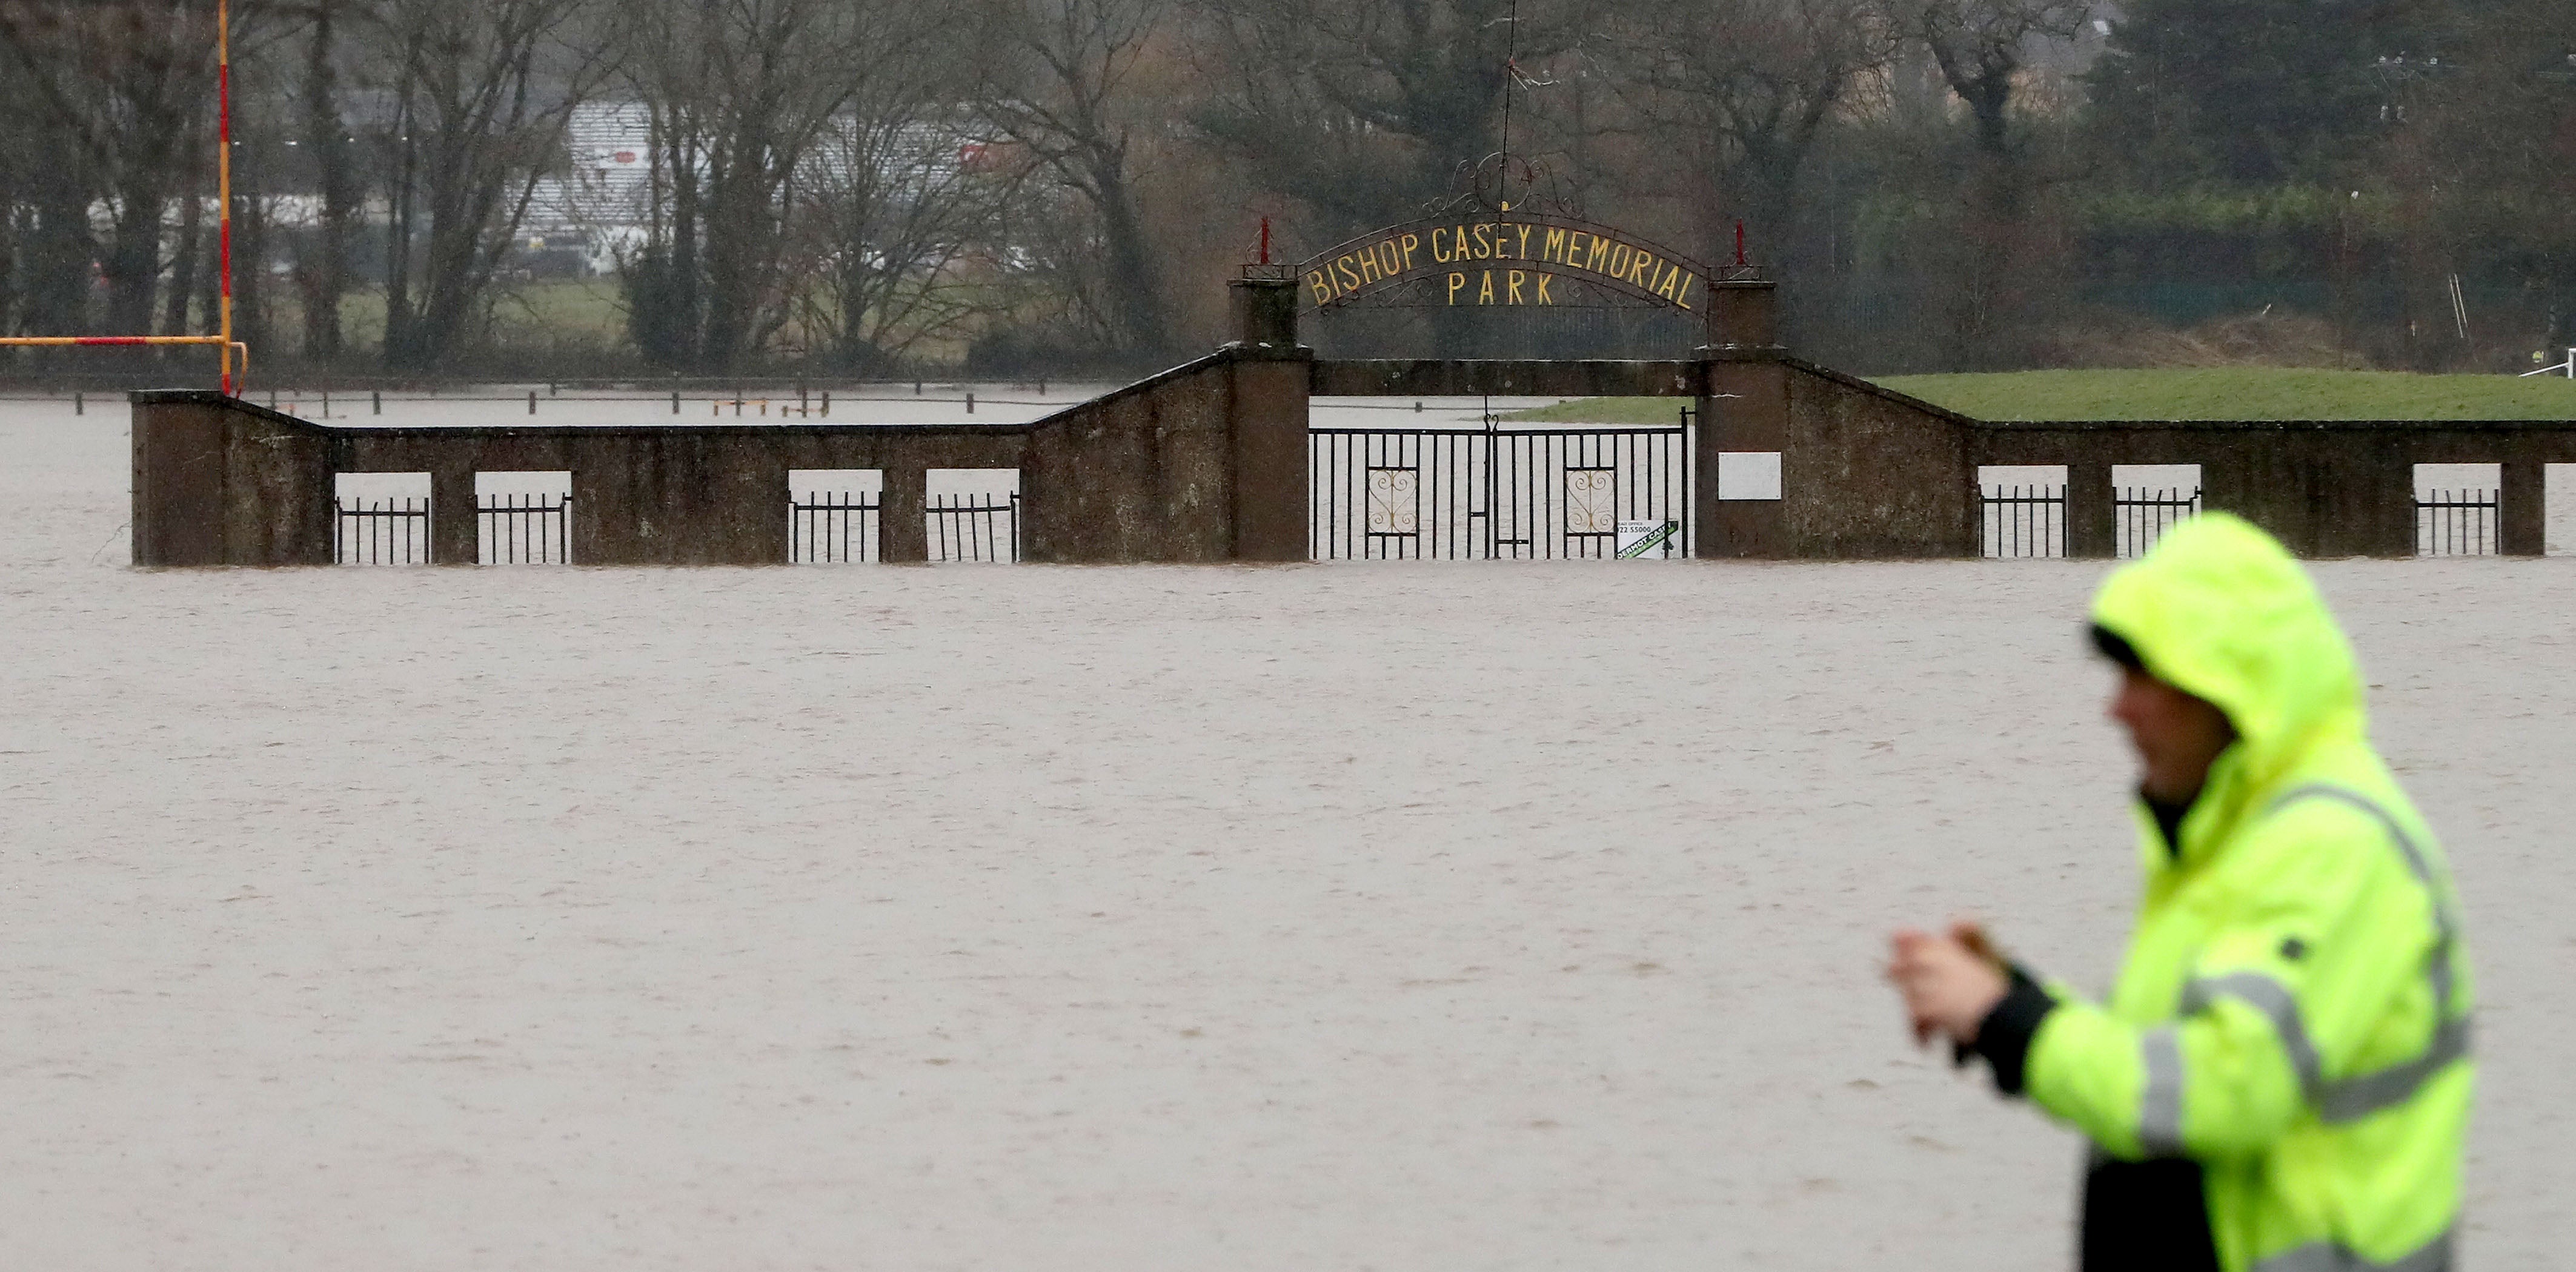 A man stops to take a picture of floodwater at the Bishop Casey Memorial Park in Mallow, Co Cork, after the River Blackwater burst its banks (Niall Carson/PA)